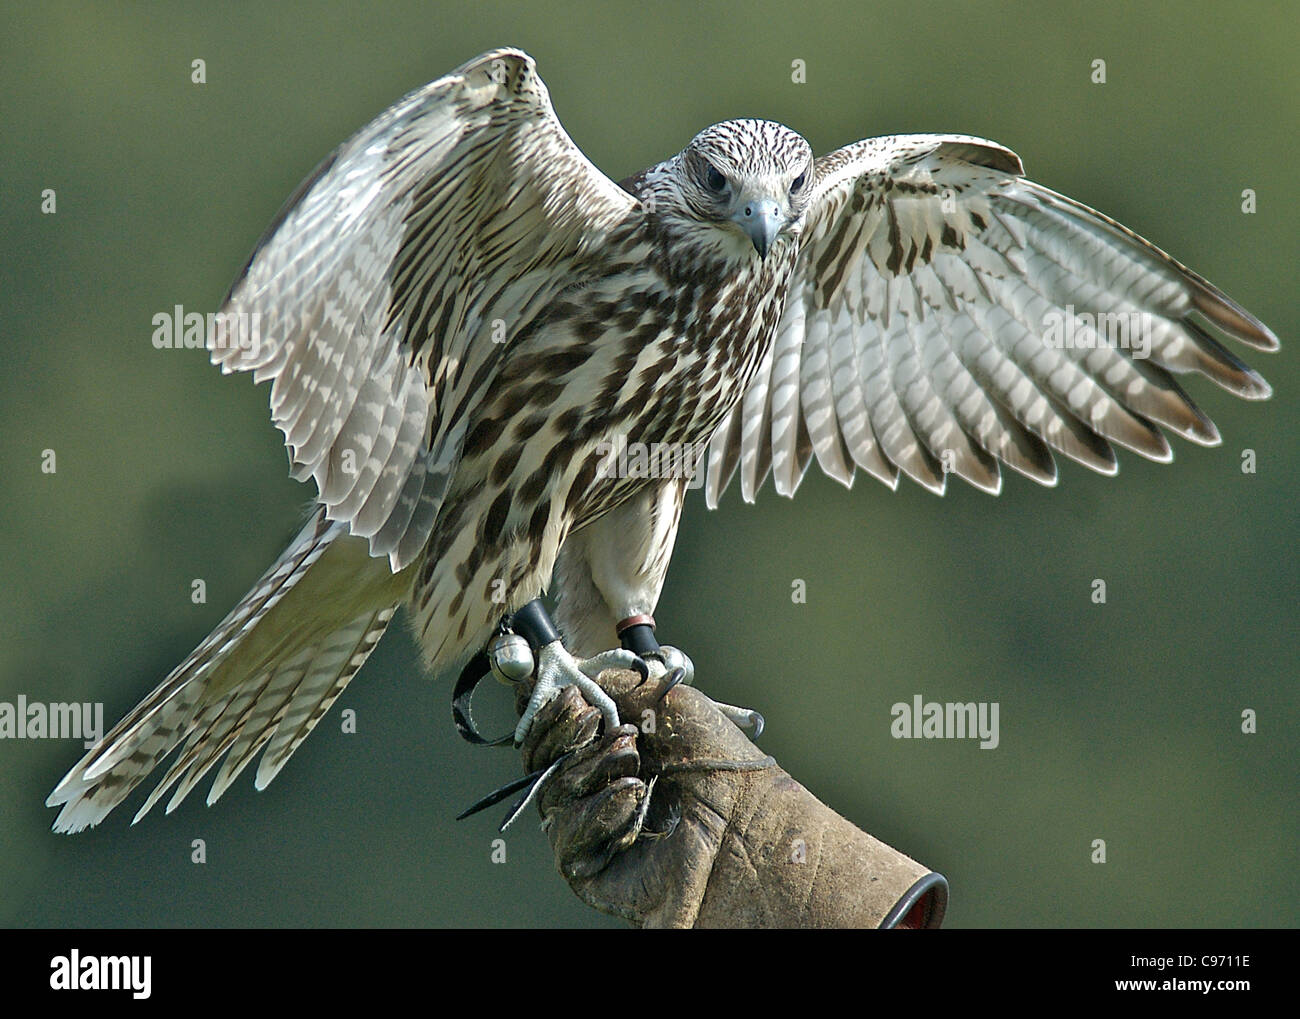 The most popular type of Falcon is the Saker here pictured on a gauntlet prior to flying. These birds of prey are used for hunting. Stock Photo